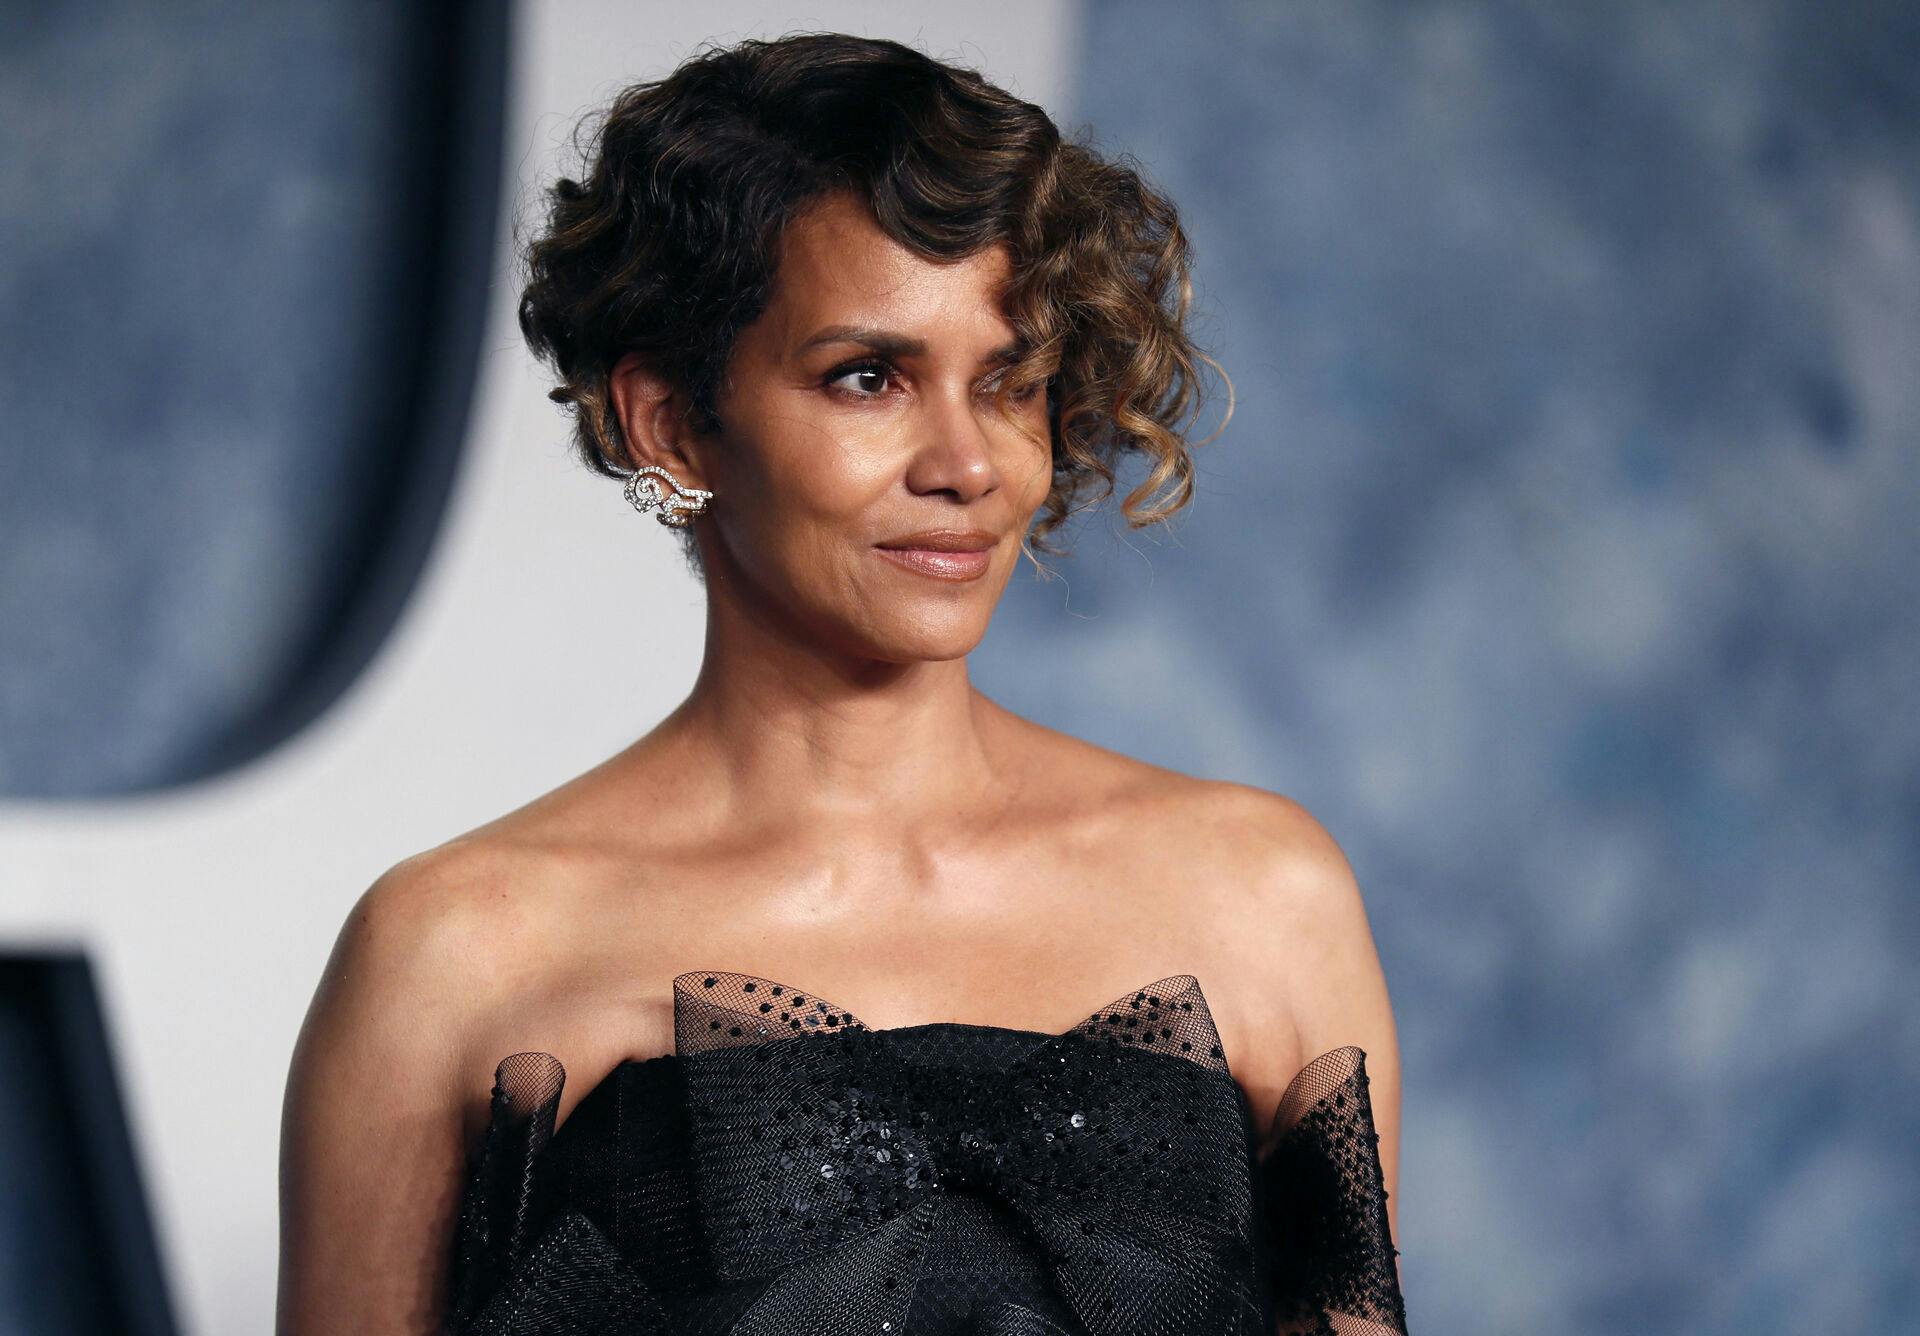 Halle Berry arrives at the Vanity Fair Oscar party after the 95th Academy Awards, known as the Oscars, in Beverly Hills, California, U.S., March 12, 2023. REUTERS/Danny Moloshok